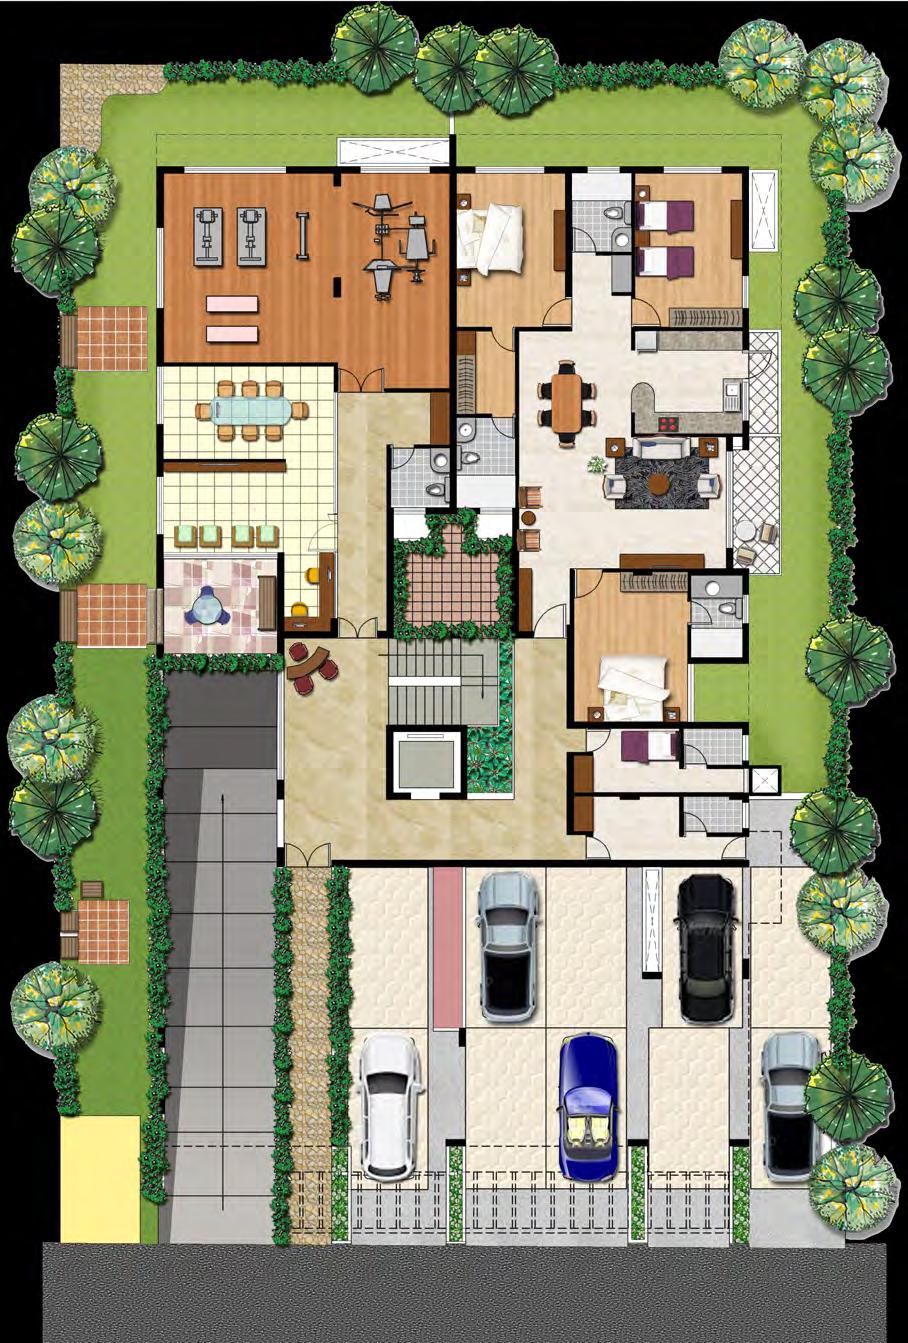 Ground Floor Plan LADSCAPED PERIPHERY Private Garden Toilet 6 1 x 8 0 Business Centre Digital Gaming Zone Gymnasium 29 2 X 19 5 Pantry 6 0 x